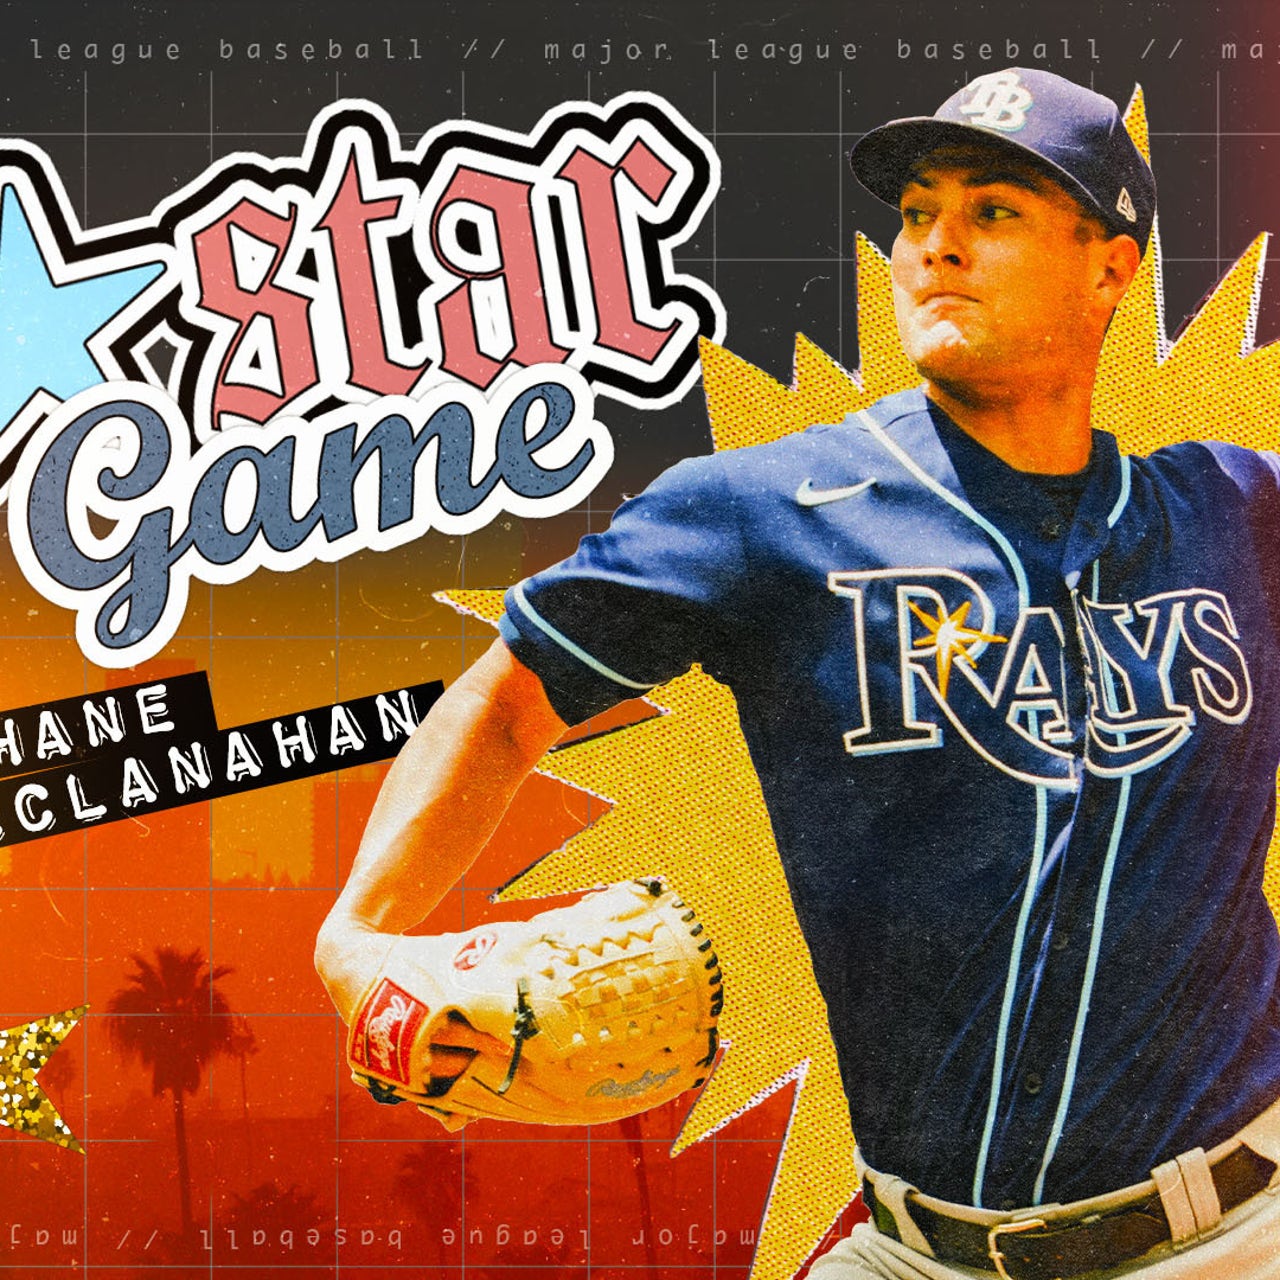 Shane McClanahan named to 2023 All-Star Game for Rays